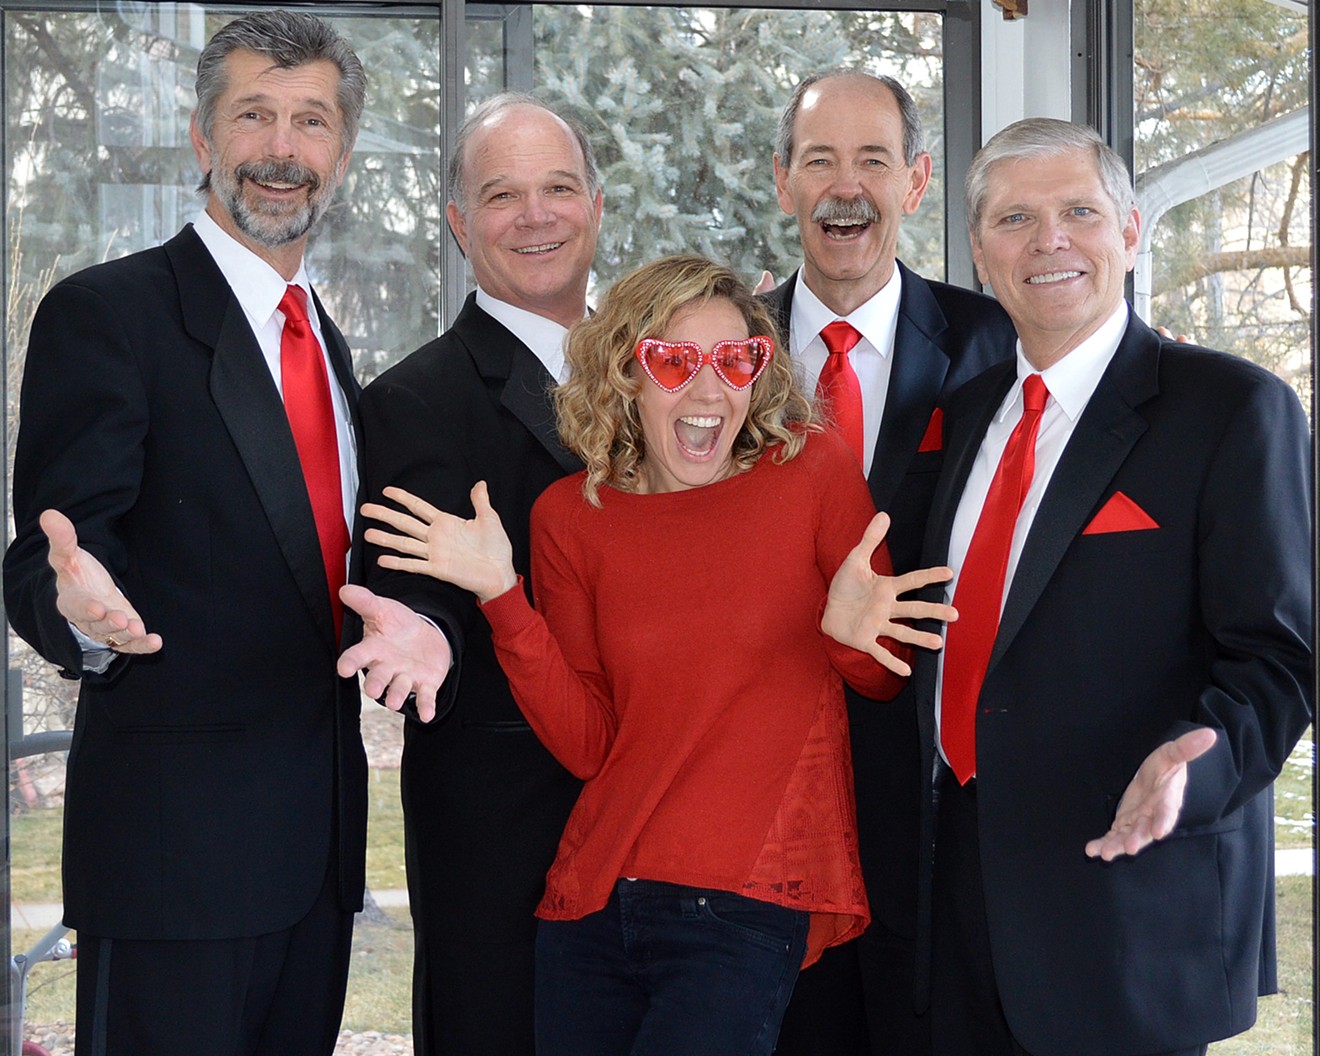 Sound of the Rockies offers up singing quartets to wow your significant other this Valentine's Day.